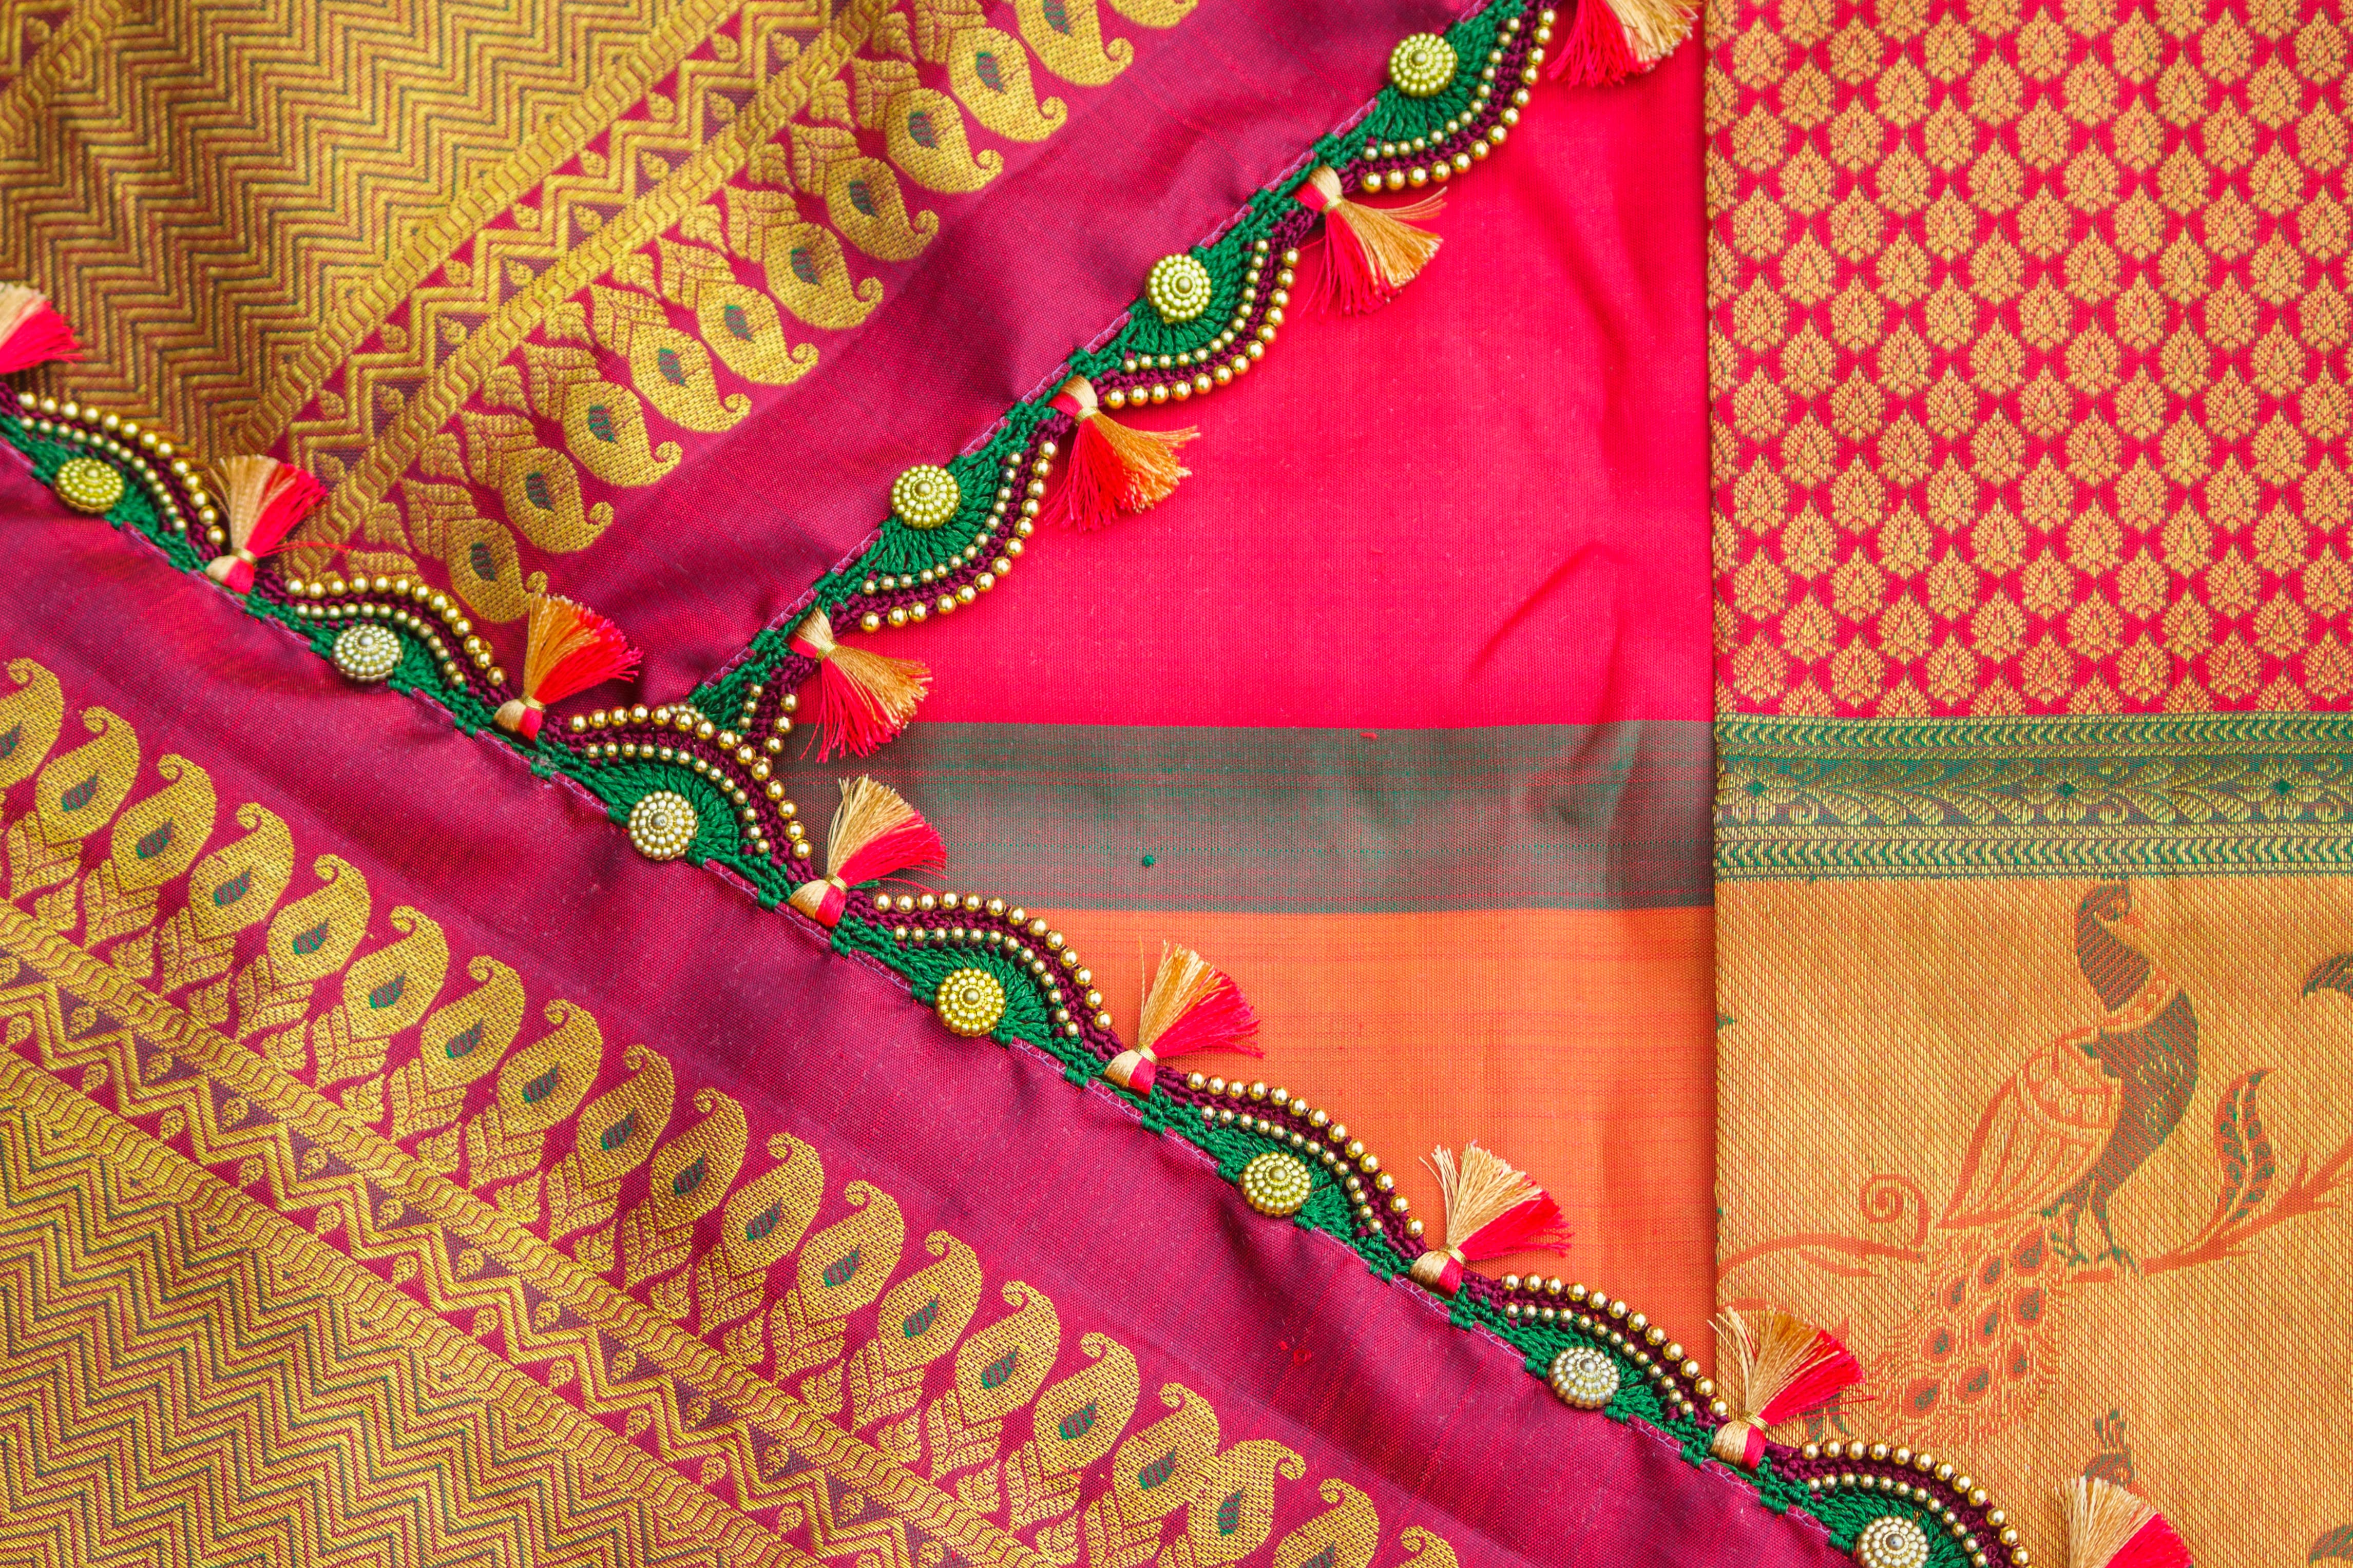 Different Styles of Bridal Sarees in New York, NY